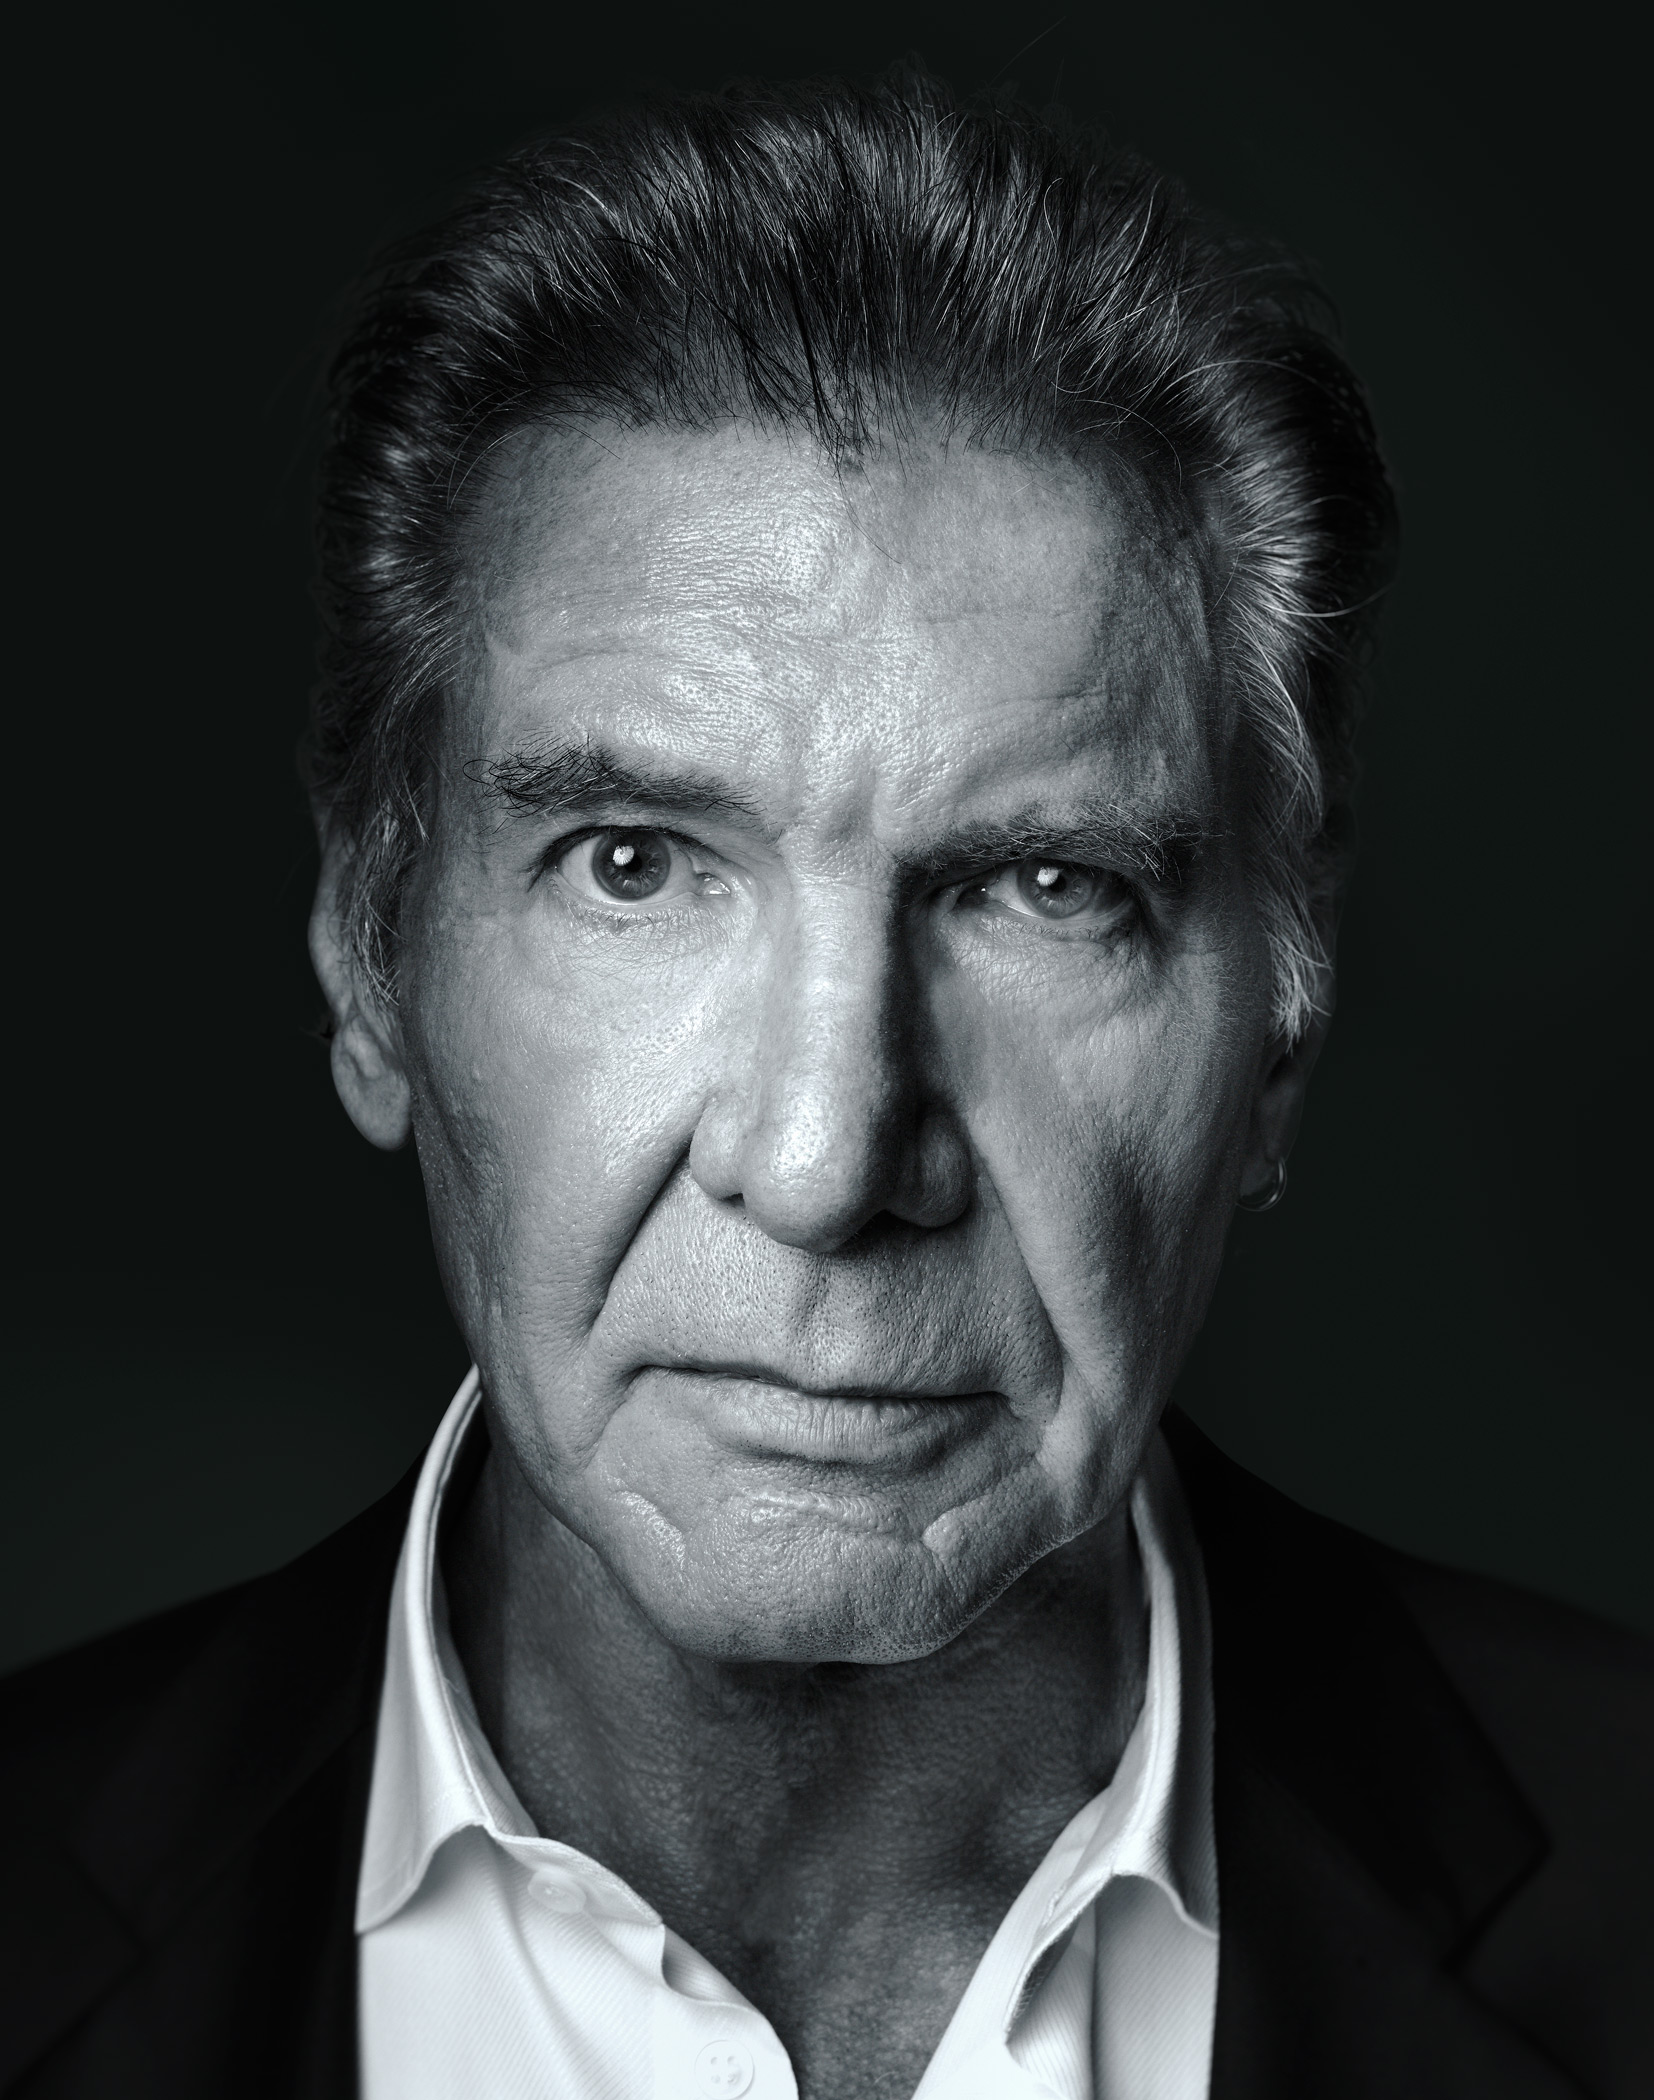 Harrison Ford photographed for TIME on October 16, 2015 in Los Angeles.From  Meet the Cast of Star Wars: The Force Awakens